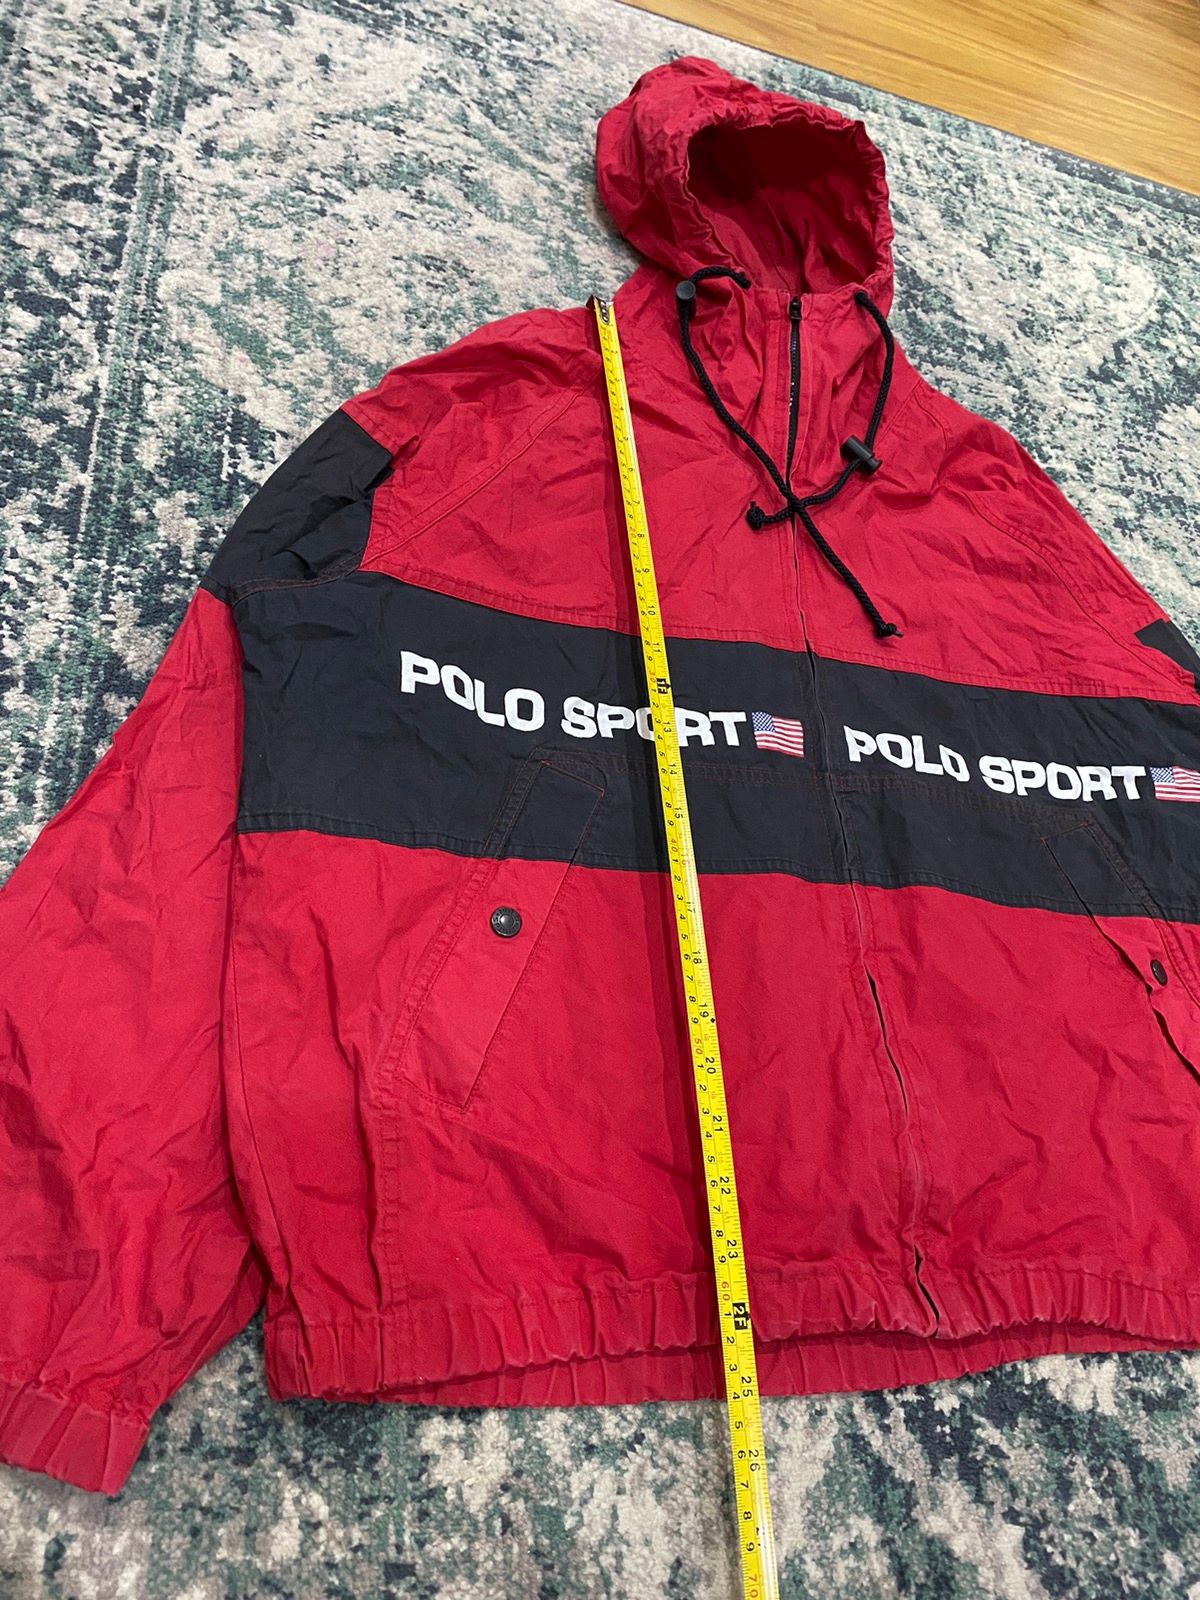 Vintage Polo Sport Ralph Lauren Spell Out Jacket - 9